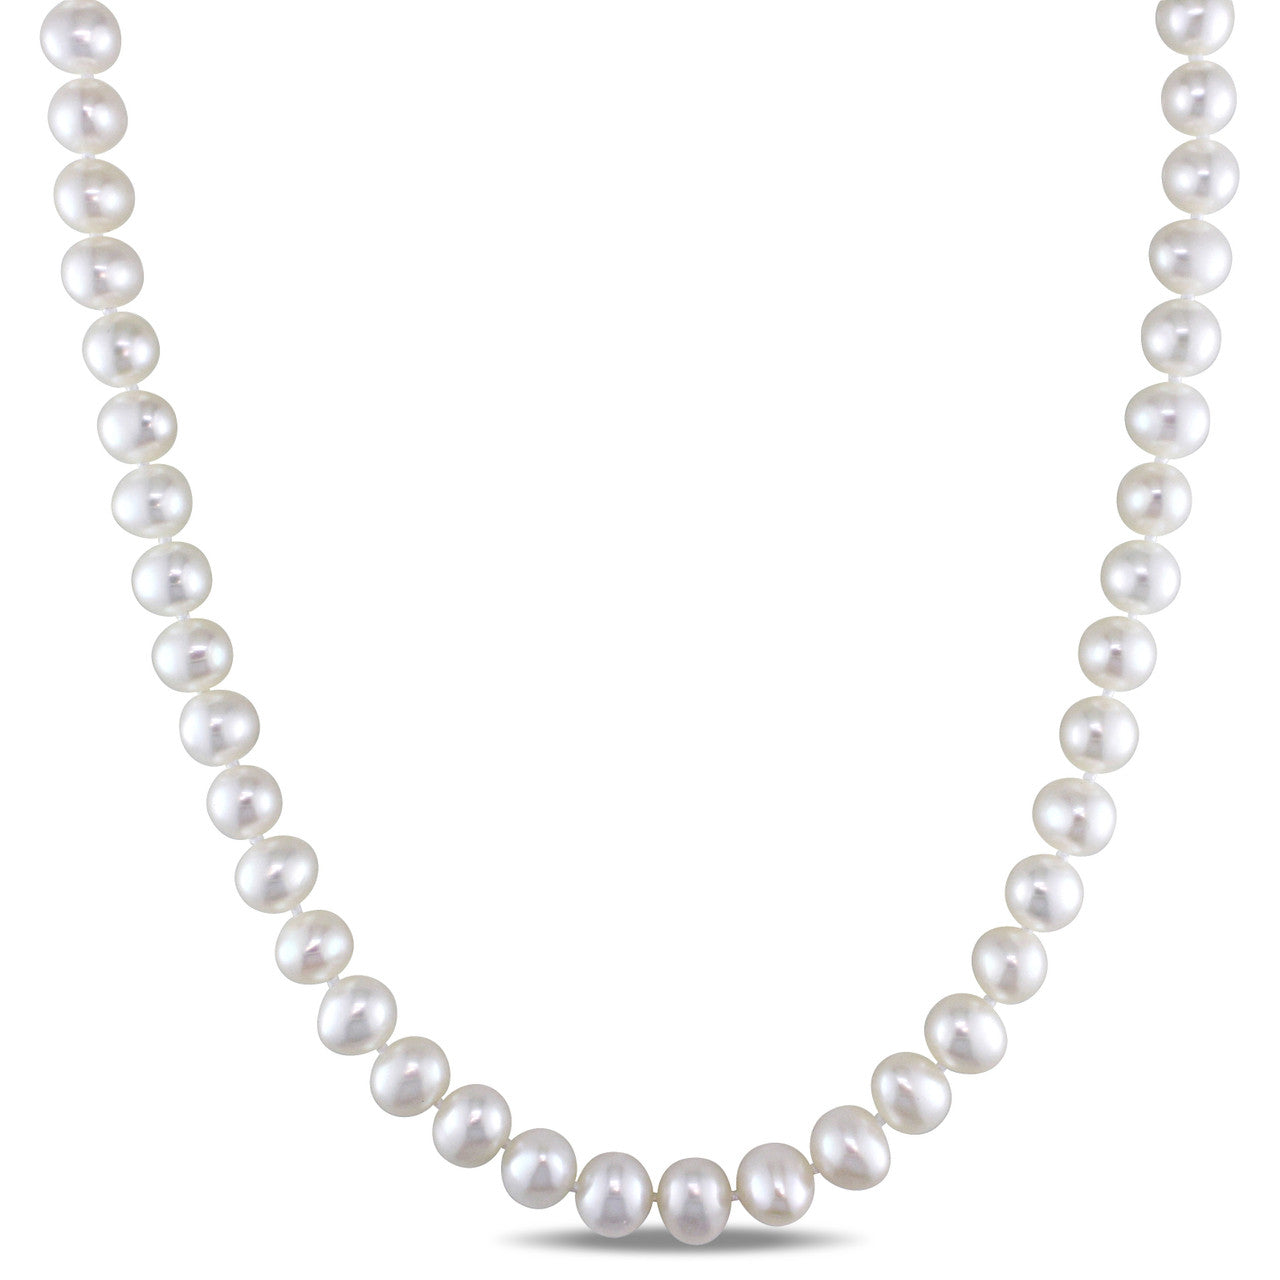 Ice Jewellery Freshwater Cultured White Pearl Necklace w/ Fish Eye Clasp in Sterling Silver - 75000005010 | Ice Jewellery Australia